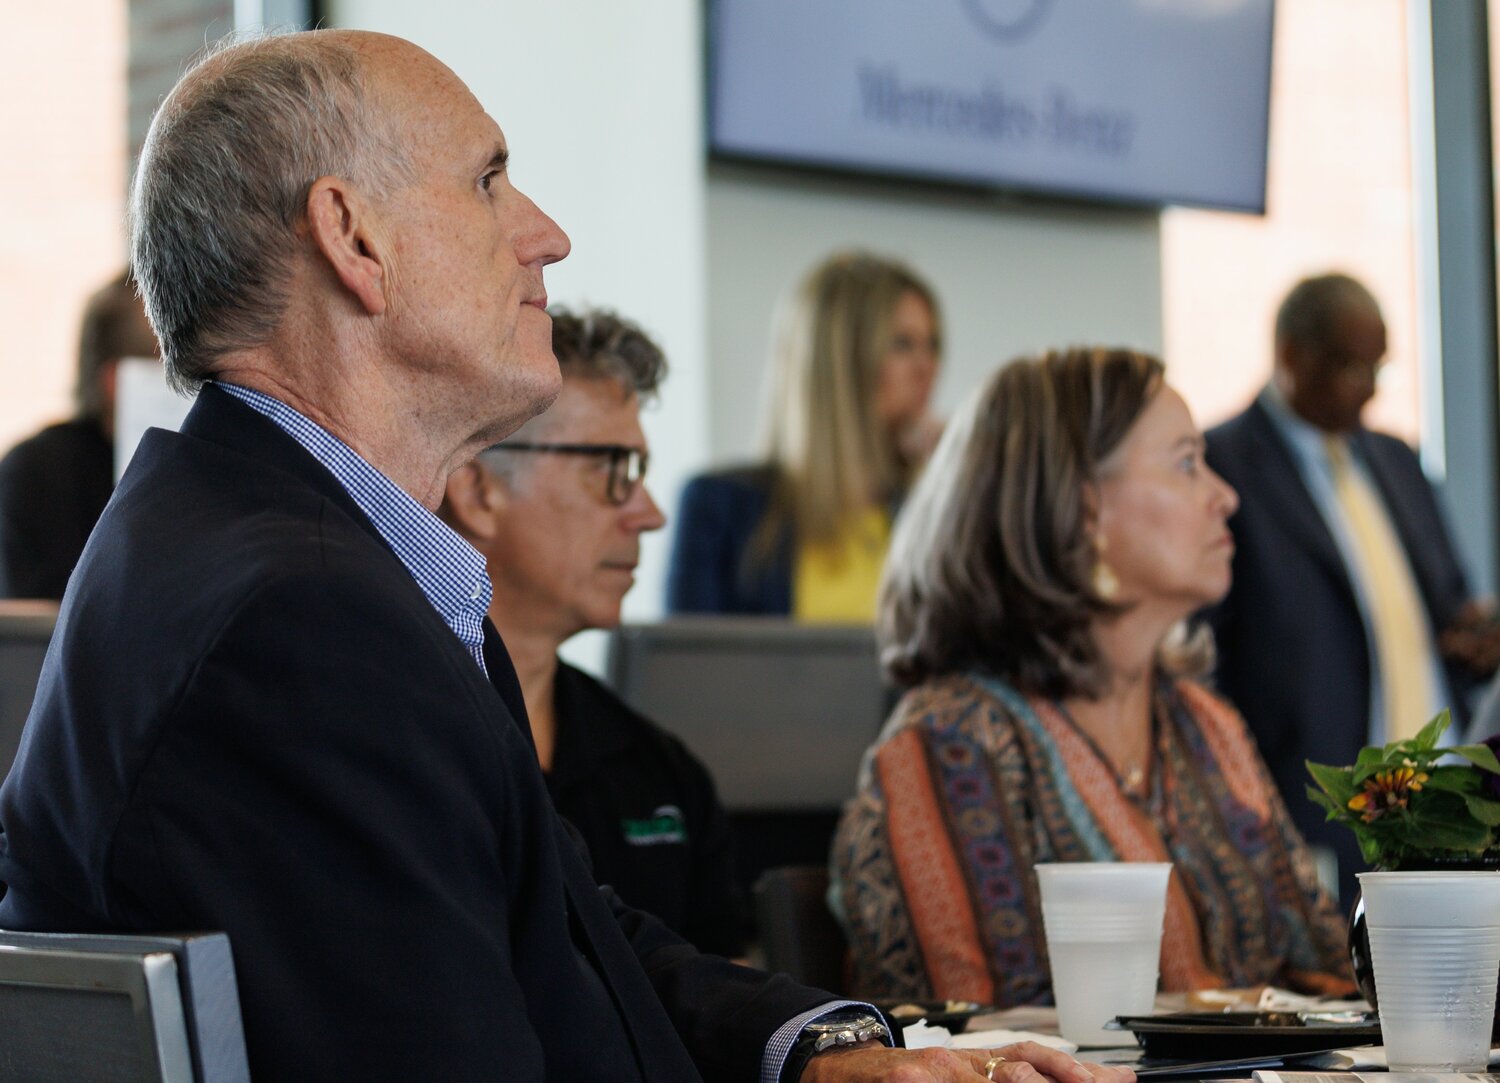 Mac Healy listens during the Downtown Visionaries awards luncheon Thursday at Segra Stadium.